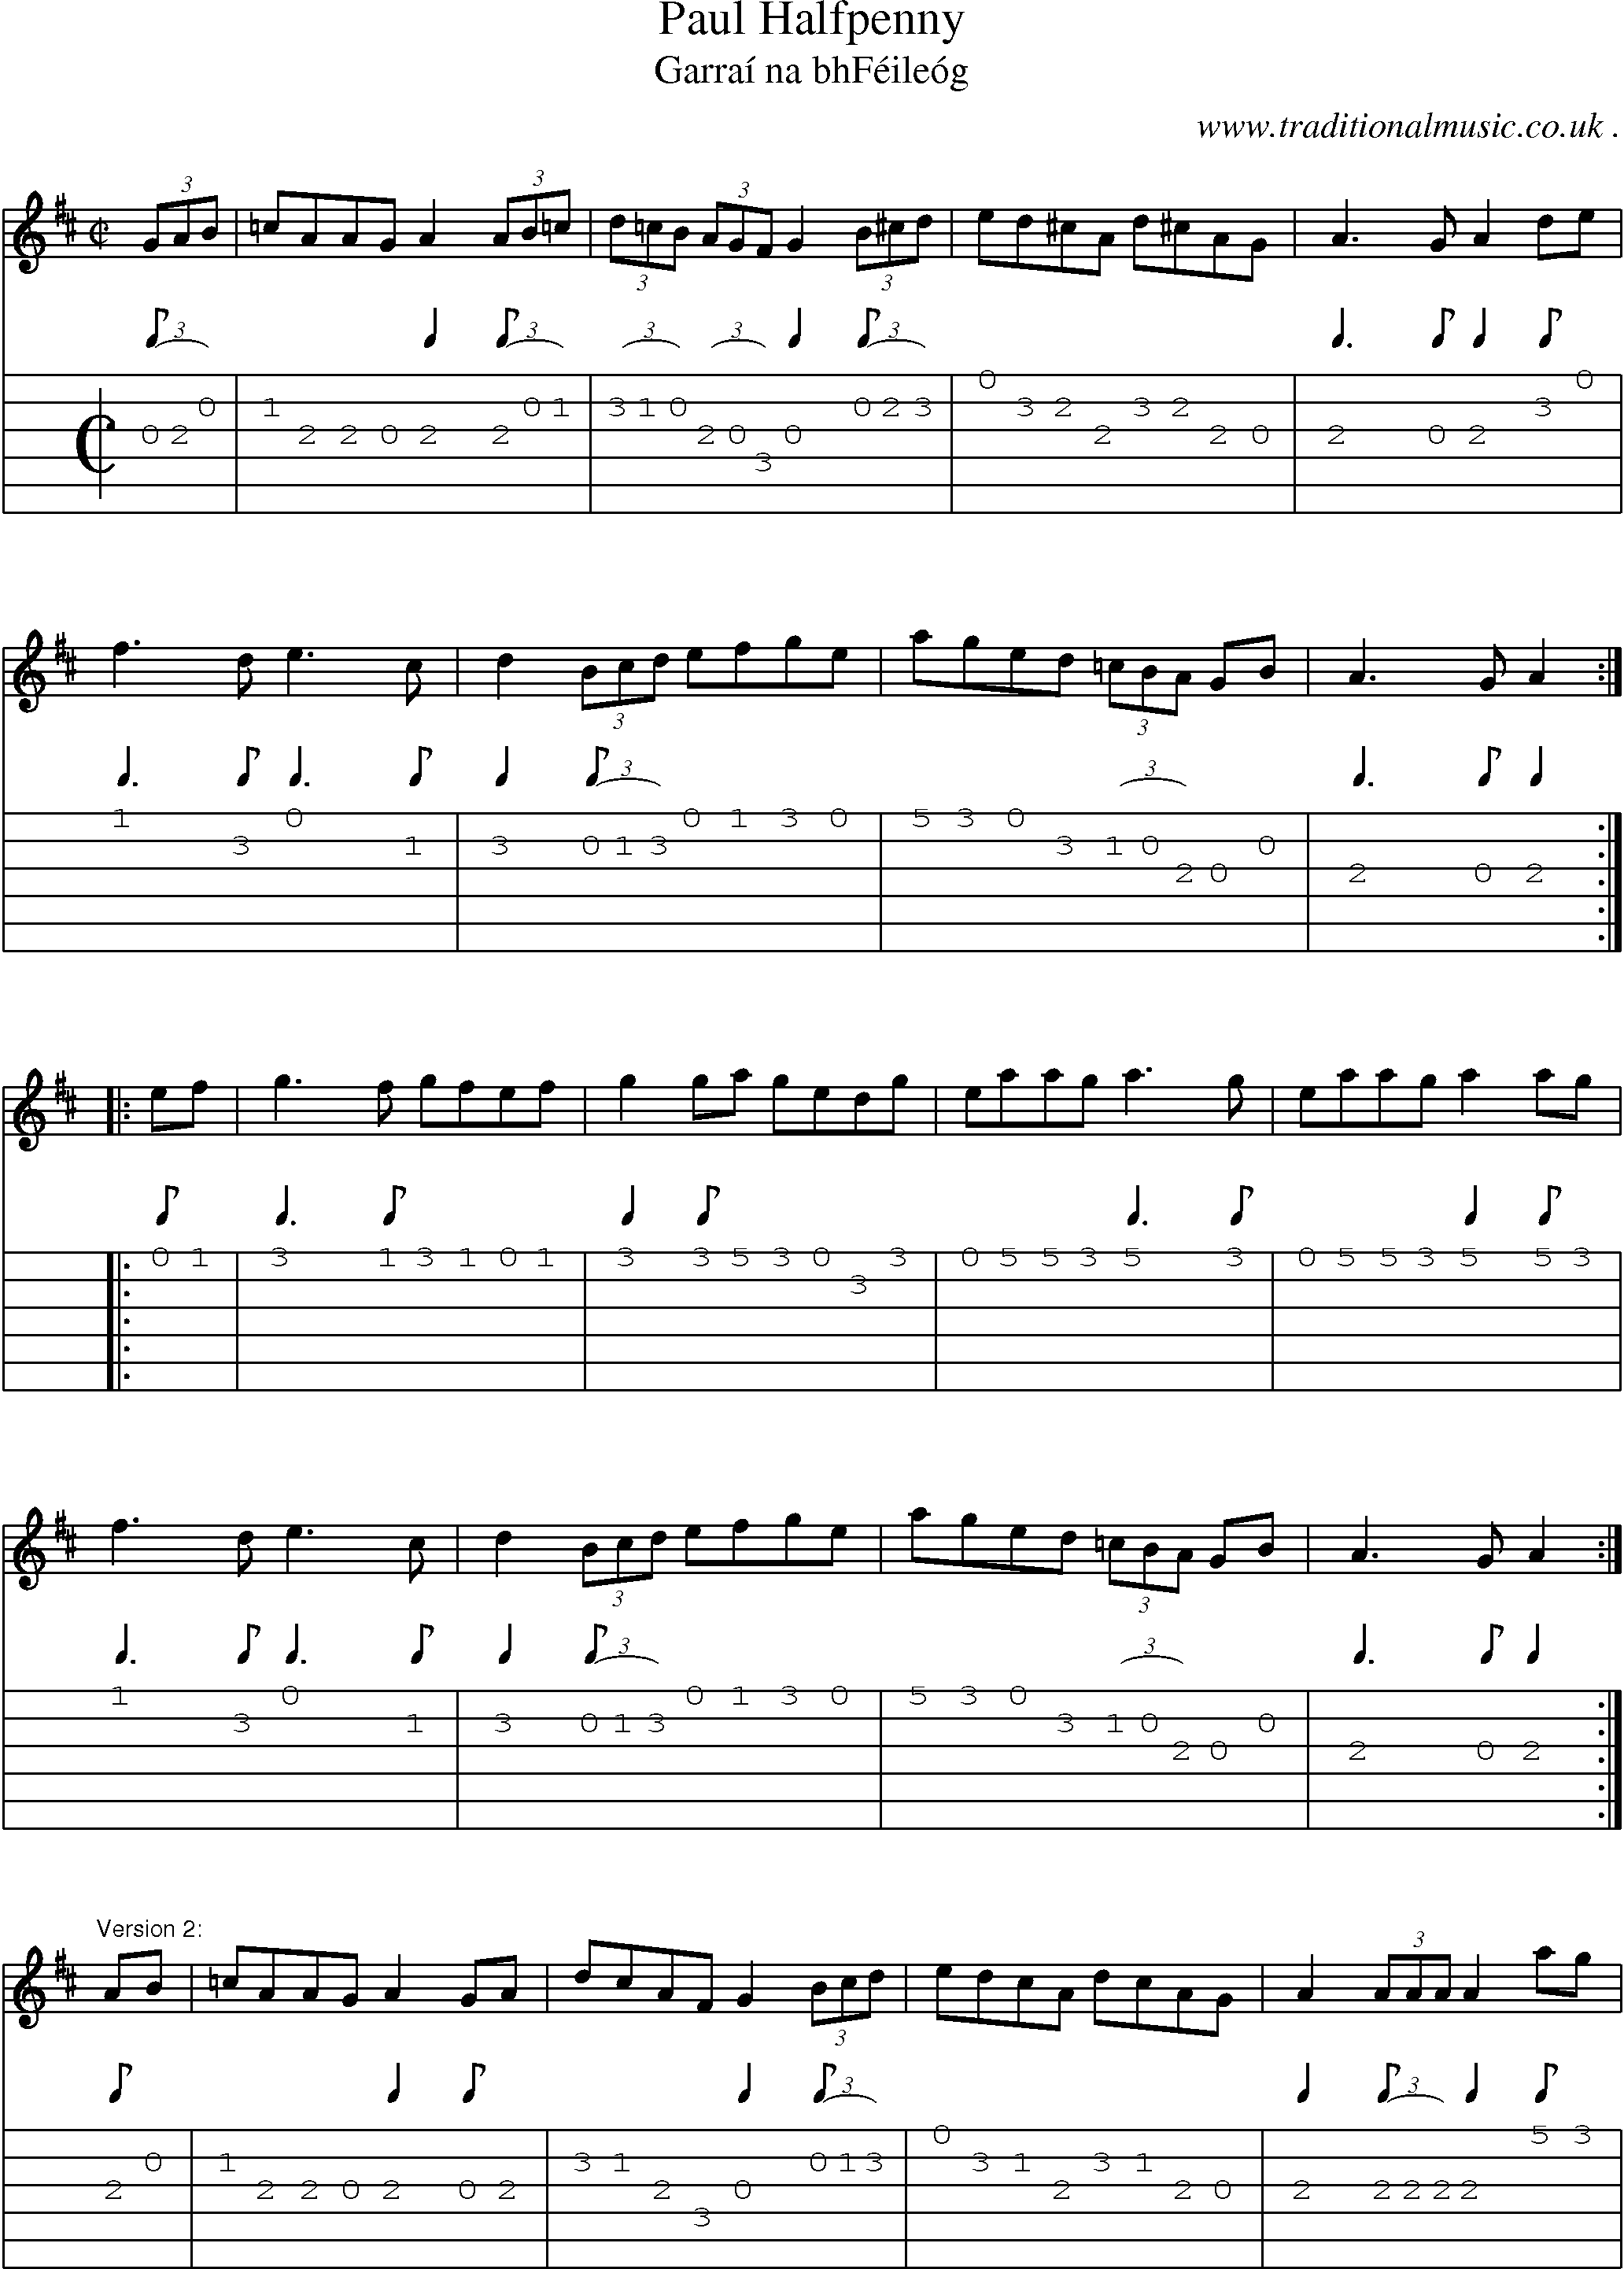 Sheet-Music and Guitar Tabs for Paul Halfpenny